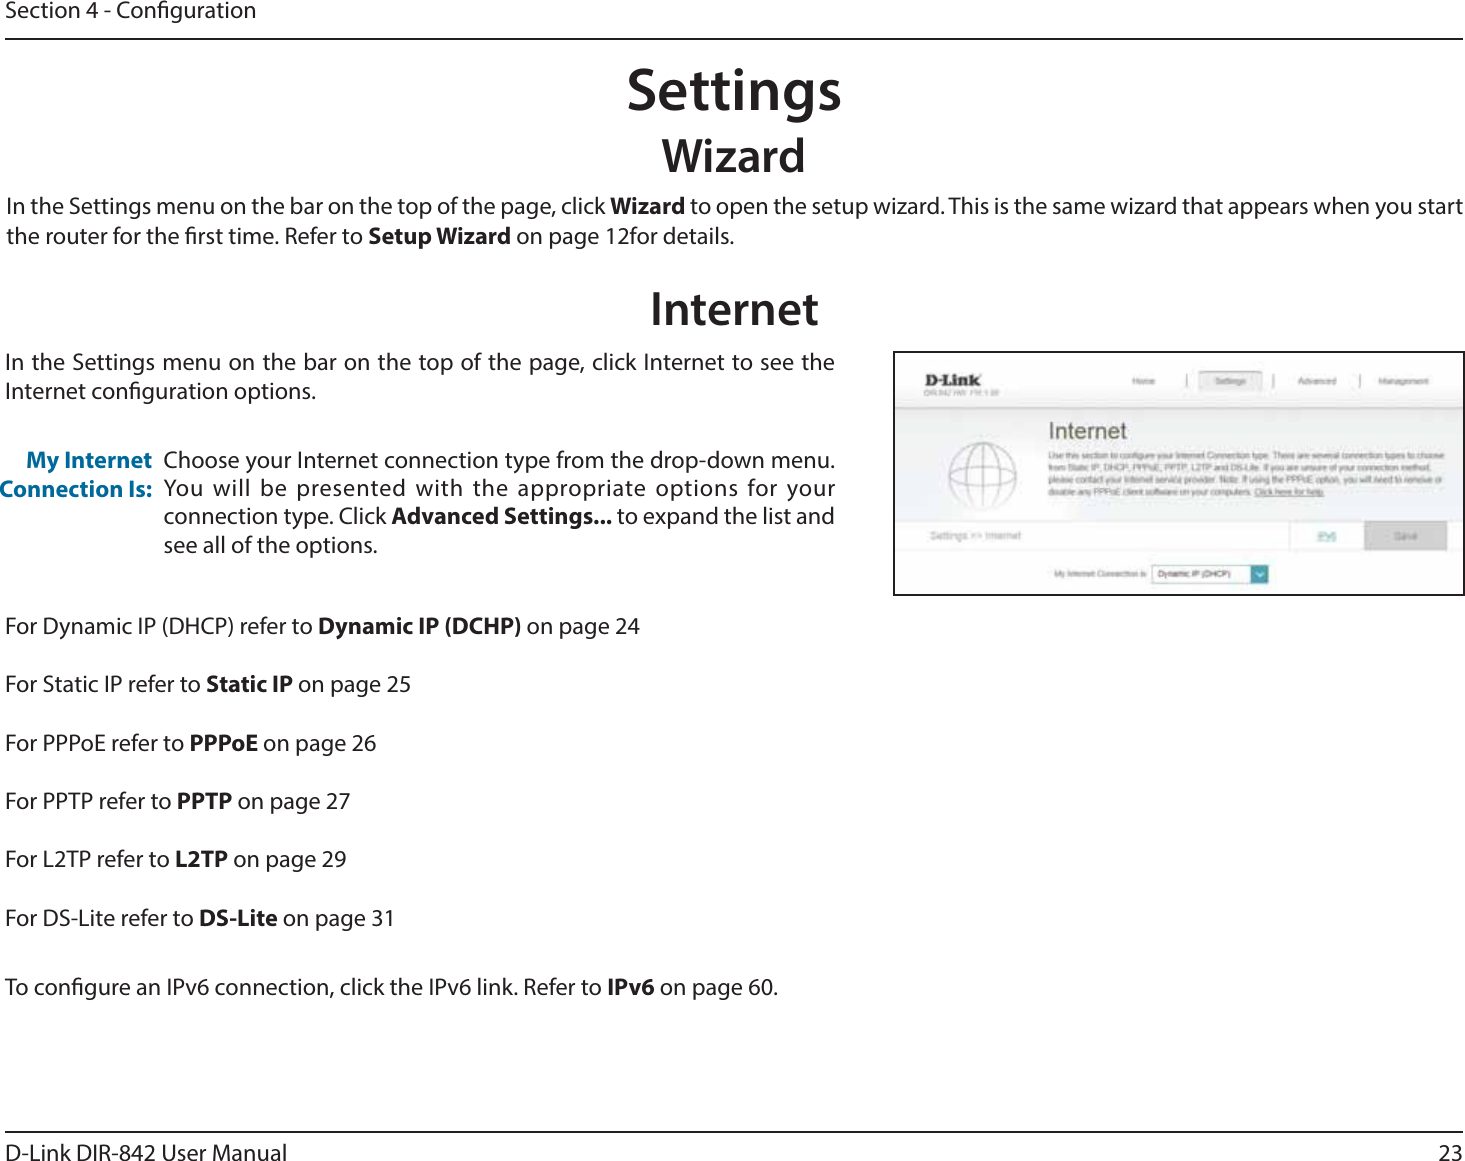 23D-Link DIR-842 User ManualSection 4 - CongurationSettingsWizardInternetIn the Settings menu on the bar on the top of the page, click 8J[BSE to open the setup wizard. This is the same wizard that appears when you start the router for the rst time. Refer to 4FUVQ8J[BSEon page 12for details.In the Settings menu on the bar on the top of the page, click Internet to see the Internet conguration options.Choose your Internet connection type from the drop-down menu. :PVXJMM CFQSFTFOUFEXJUIUIFBQQSPQSJBUFPQUJPOTGPSZPVSconnection type. Click &quot;EWBODFE4FUUJOHT to expand the list and see all of the options.My Internet Connection Is:&apos;PS%ZOBNJD*1%)$1SFGFSUPDynamic IP (DCHP) on page 24For Static IP refer to Static IP on page 25For PPPoE refer to PPPoE on page 26For PPTP refer to PPTP on page 27For L2TP refer to -51on page 29For DS-Lite refer to DS-Lite on page 31To congure an IPv6 connection, click the IPv6 link. Refer to IPv6 on page 60.